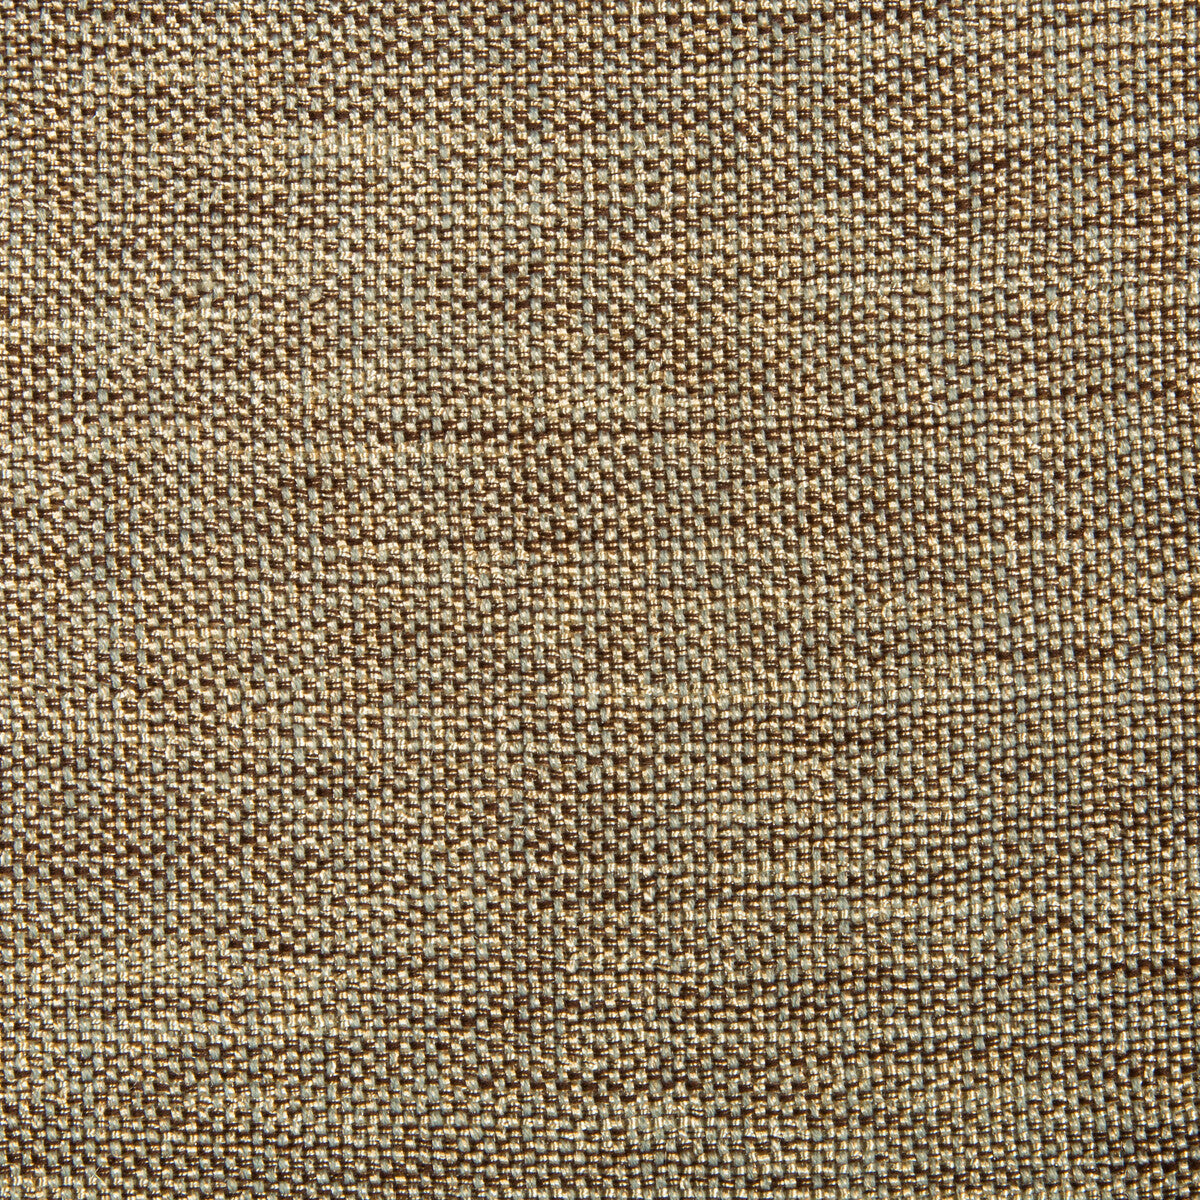 Kravet Contract fabric in 4458-621 color - pattern 4458.621.0 - by Kravet Contract